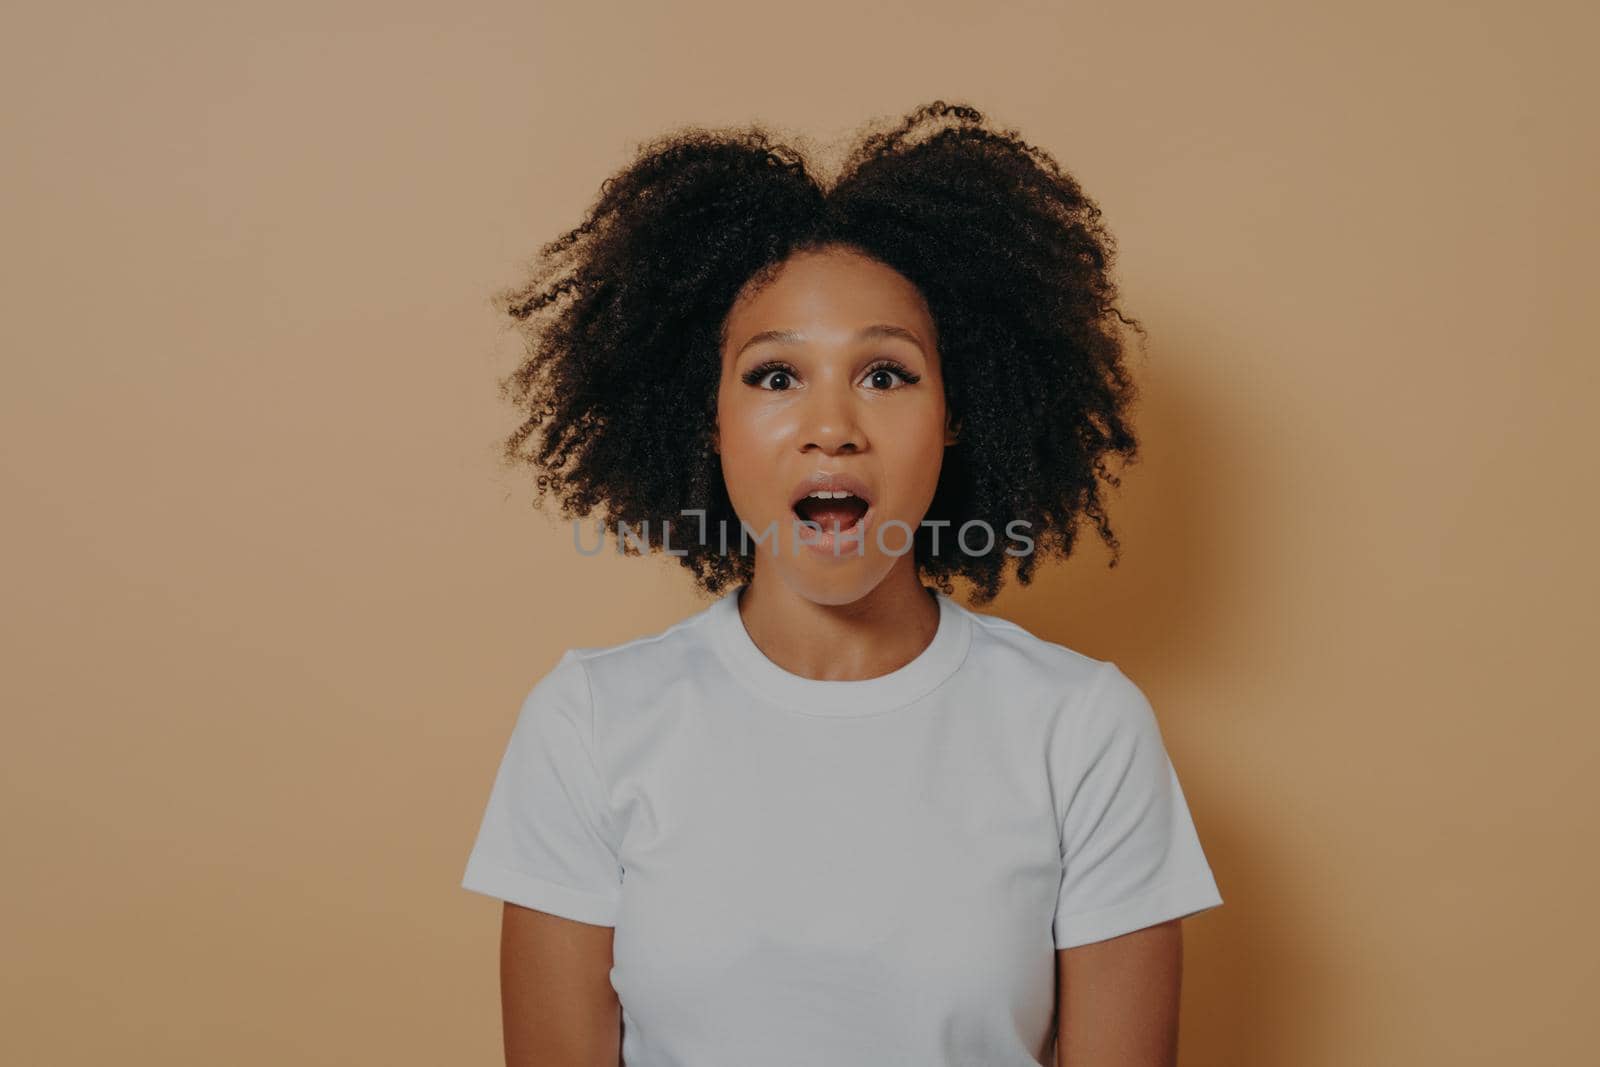 Photo of amazed stunned dark skinned female looking at camera with opened mouth, shocked african woman in white tshirt with surprised face expression posing against beige background